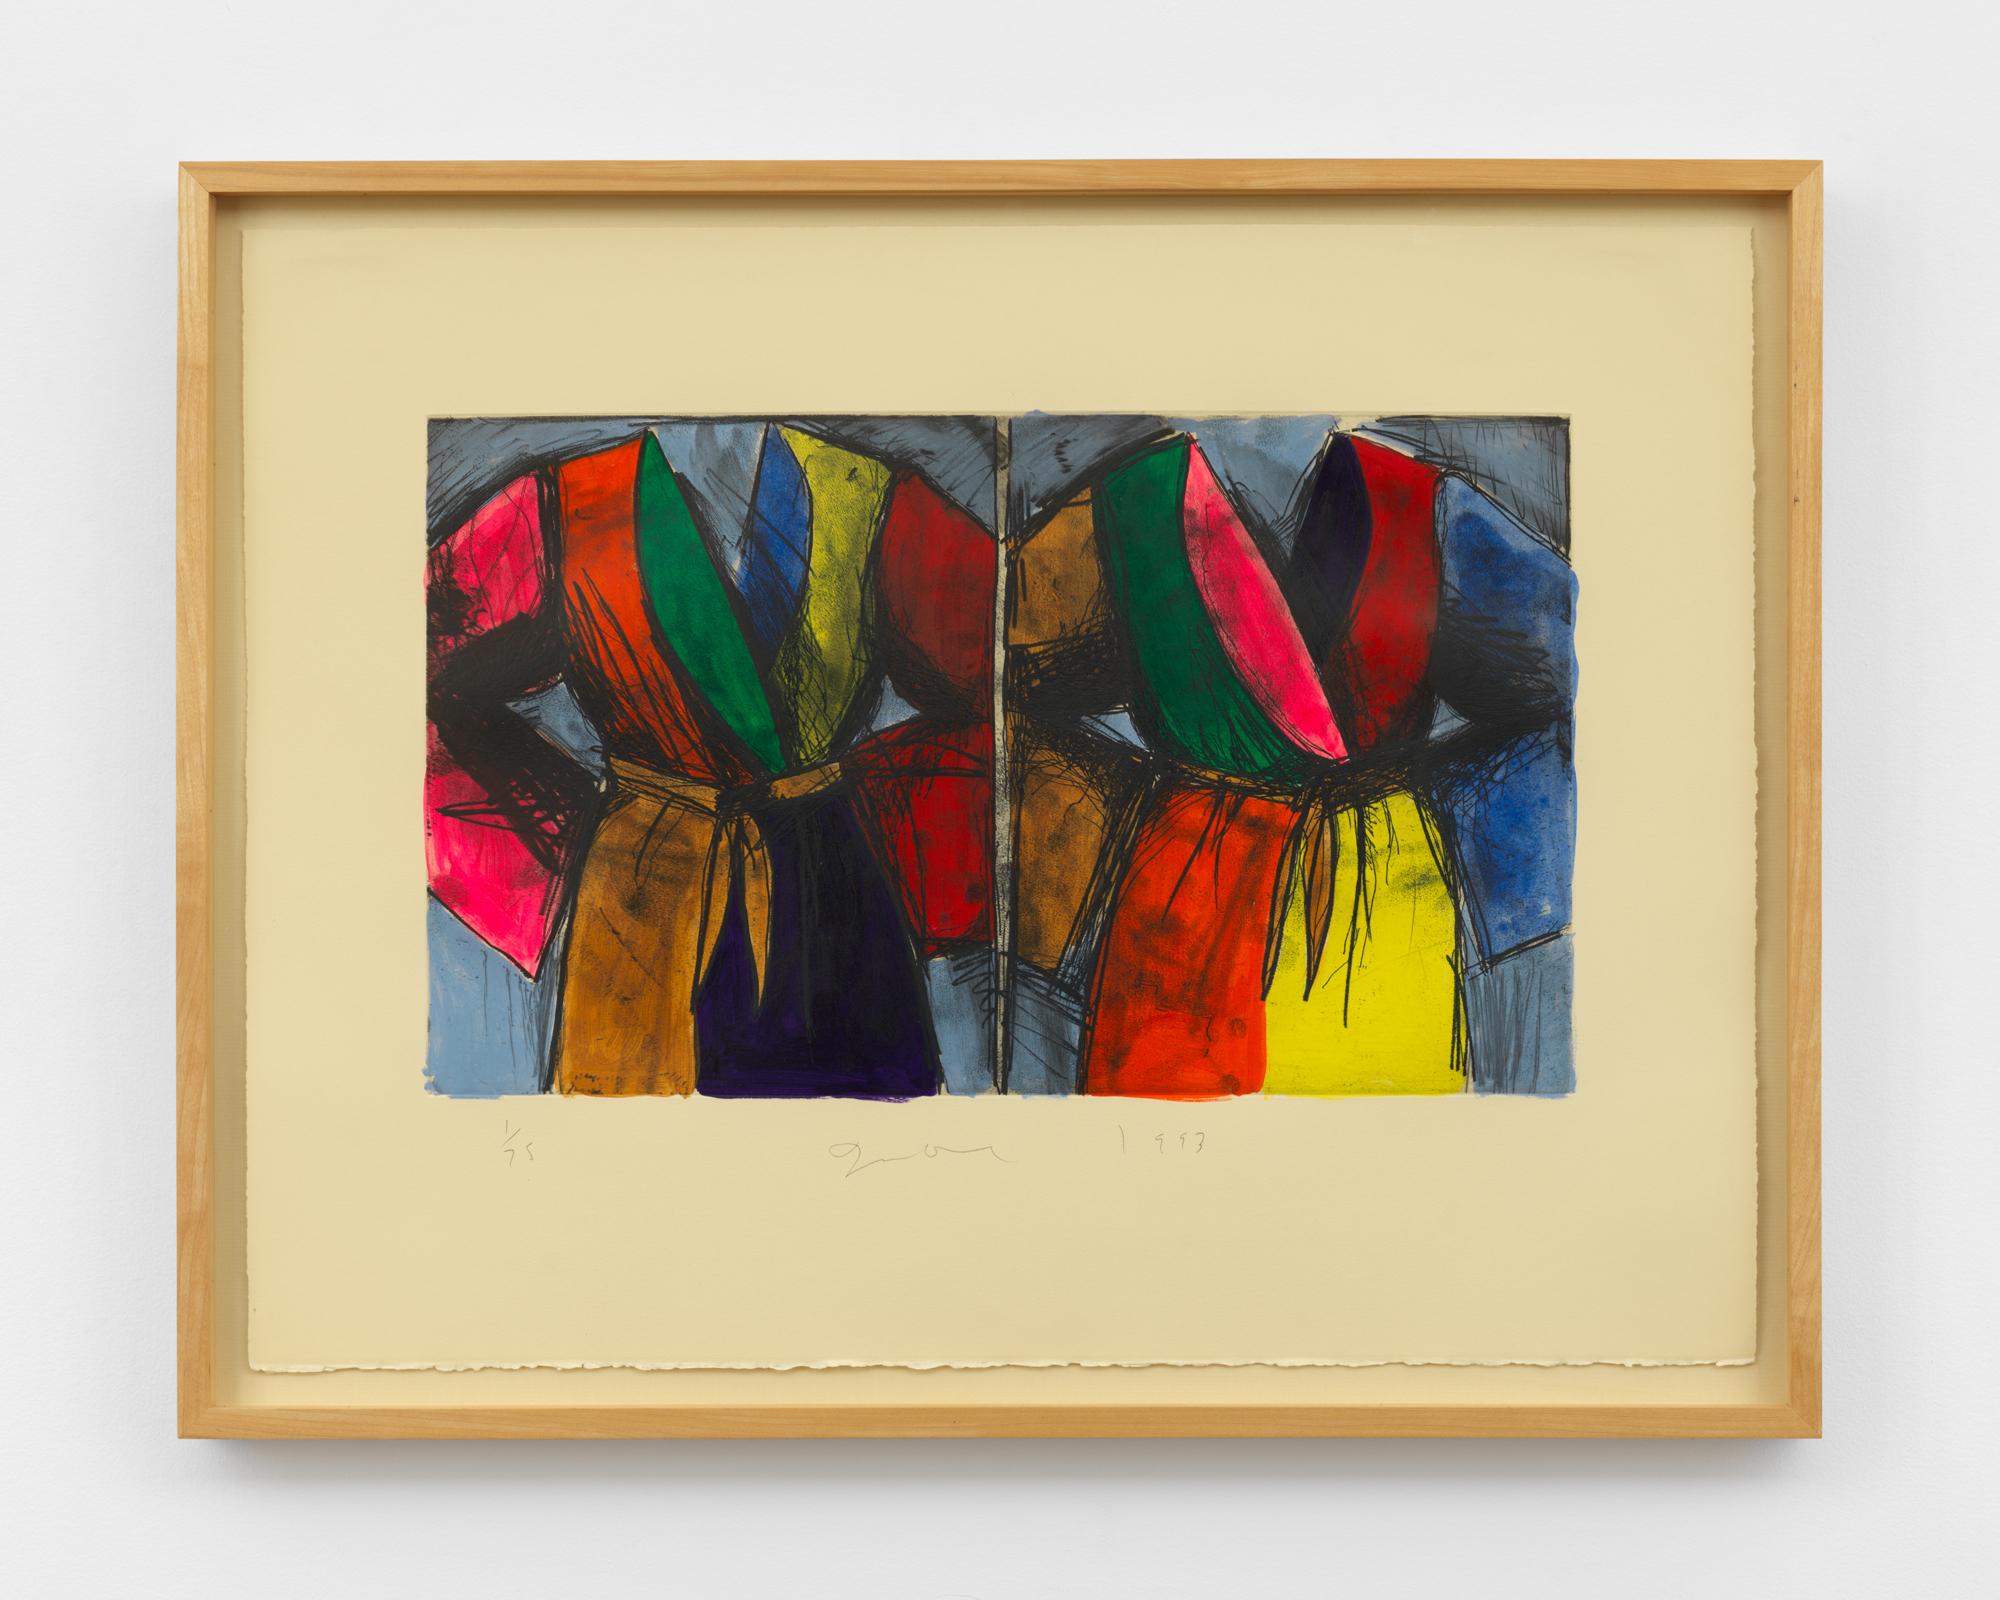 Jumps Out at You, No? - Print by Jim Dine